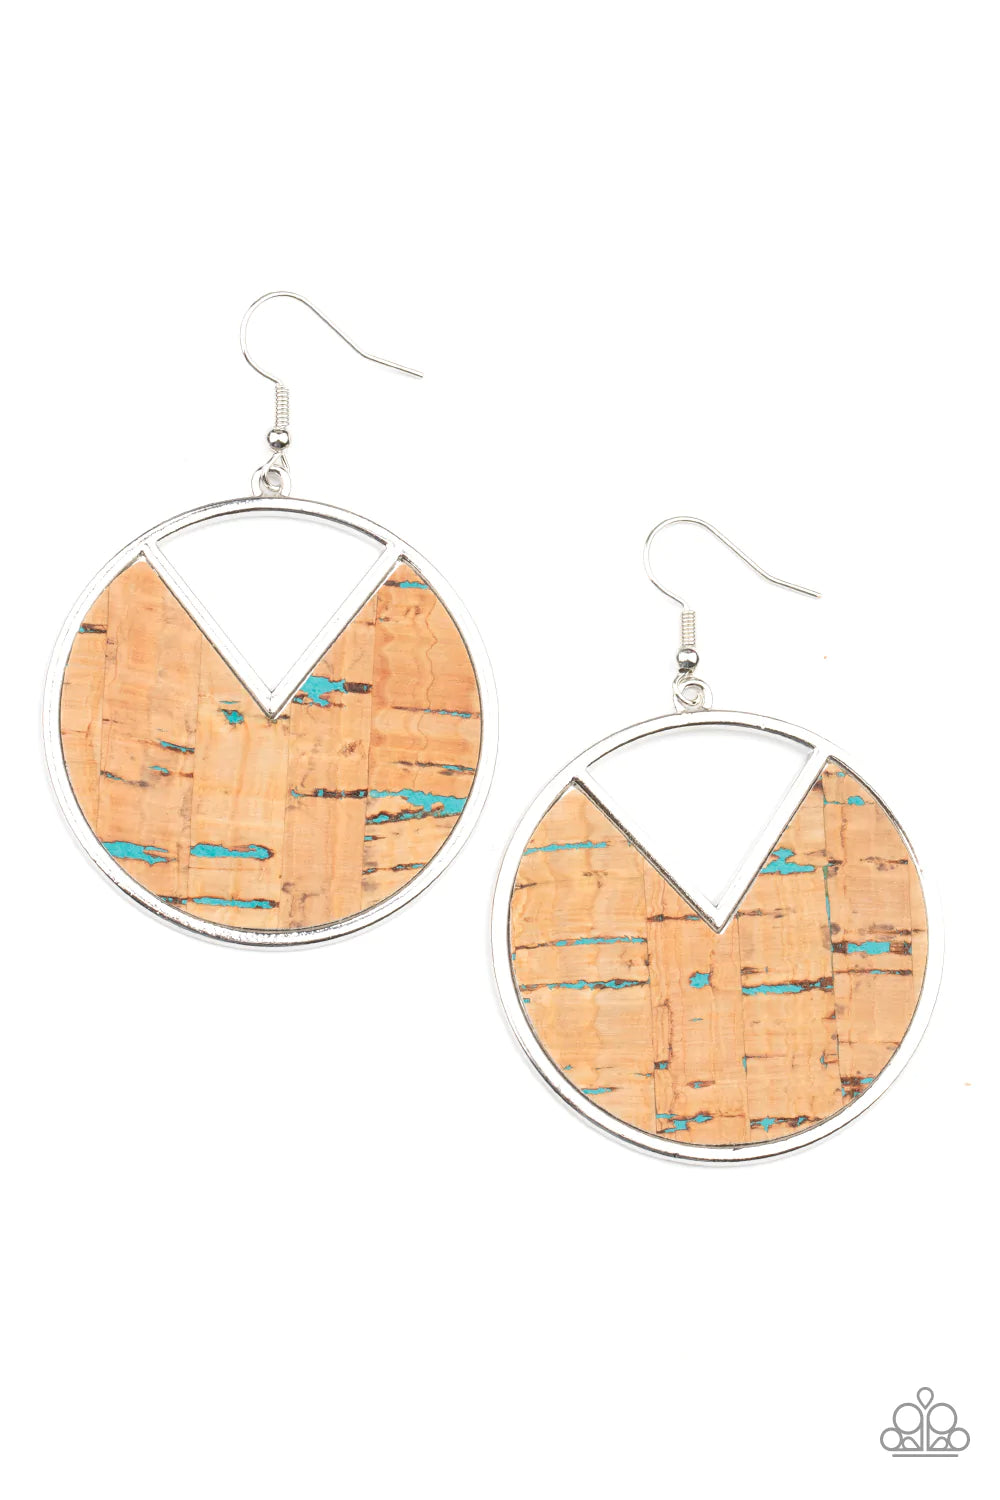 Paparazzi Accessories Nod To Nature - Blue Featuring hints of blue accents, an earthy piece of cork is placed into the center of a circular hoop. A triangular slice is removed from the cork, creating an edgy airy finish. Earring attaches to a standard fis